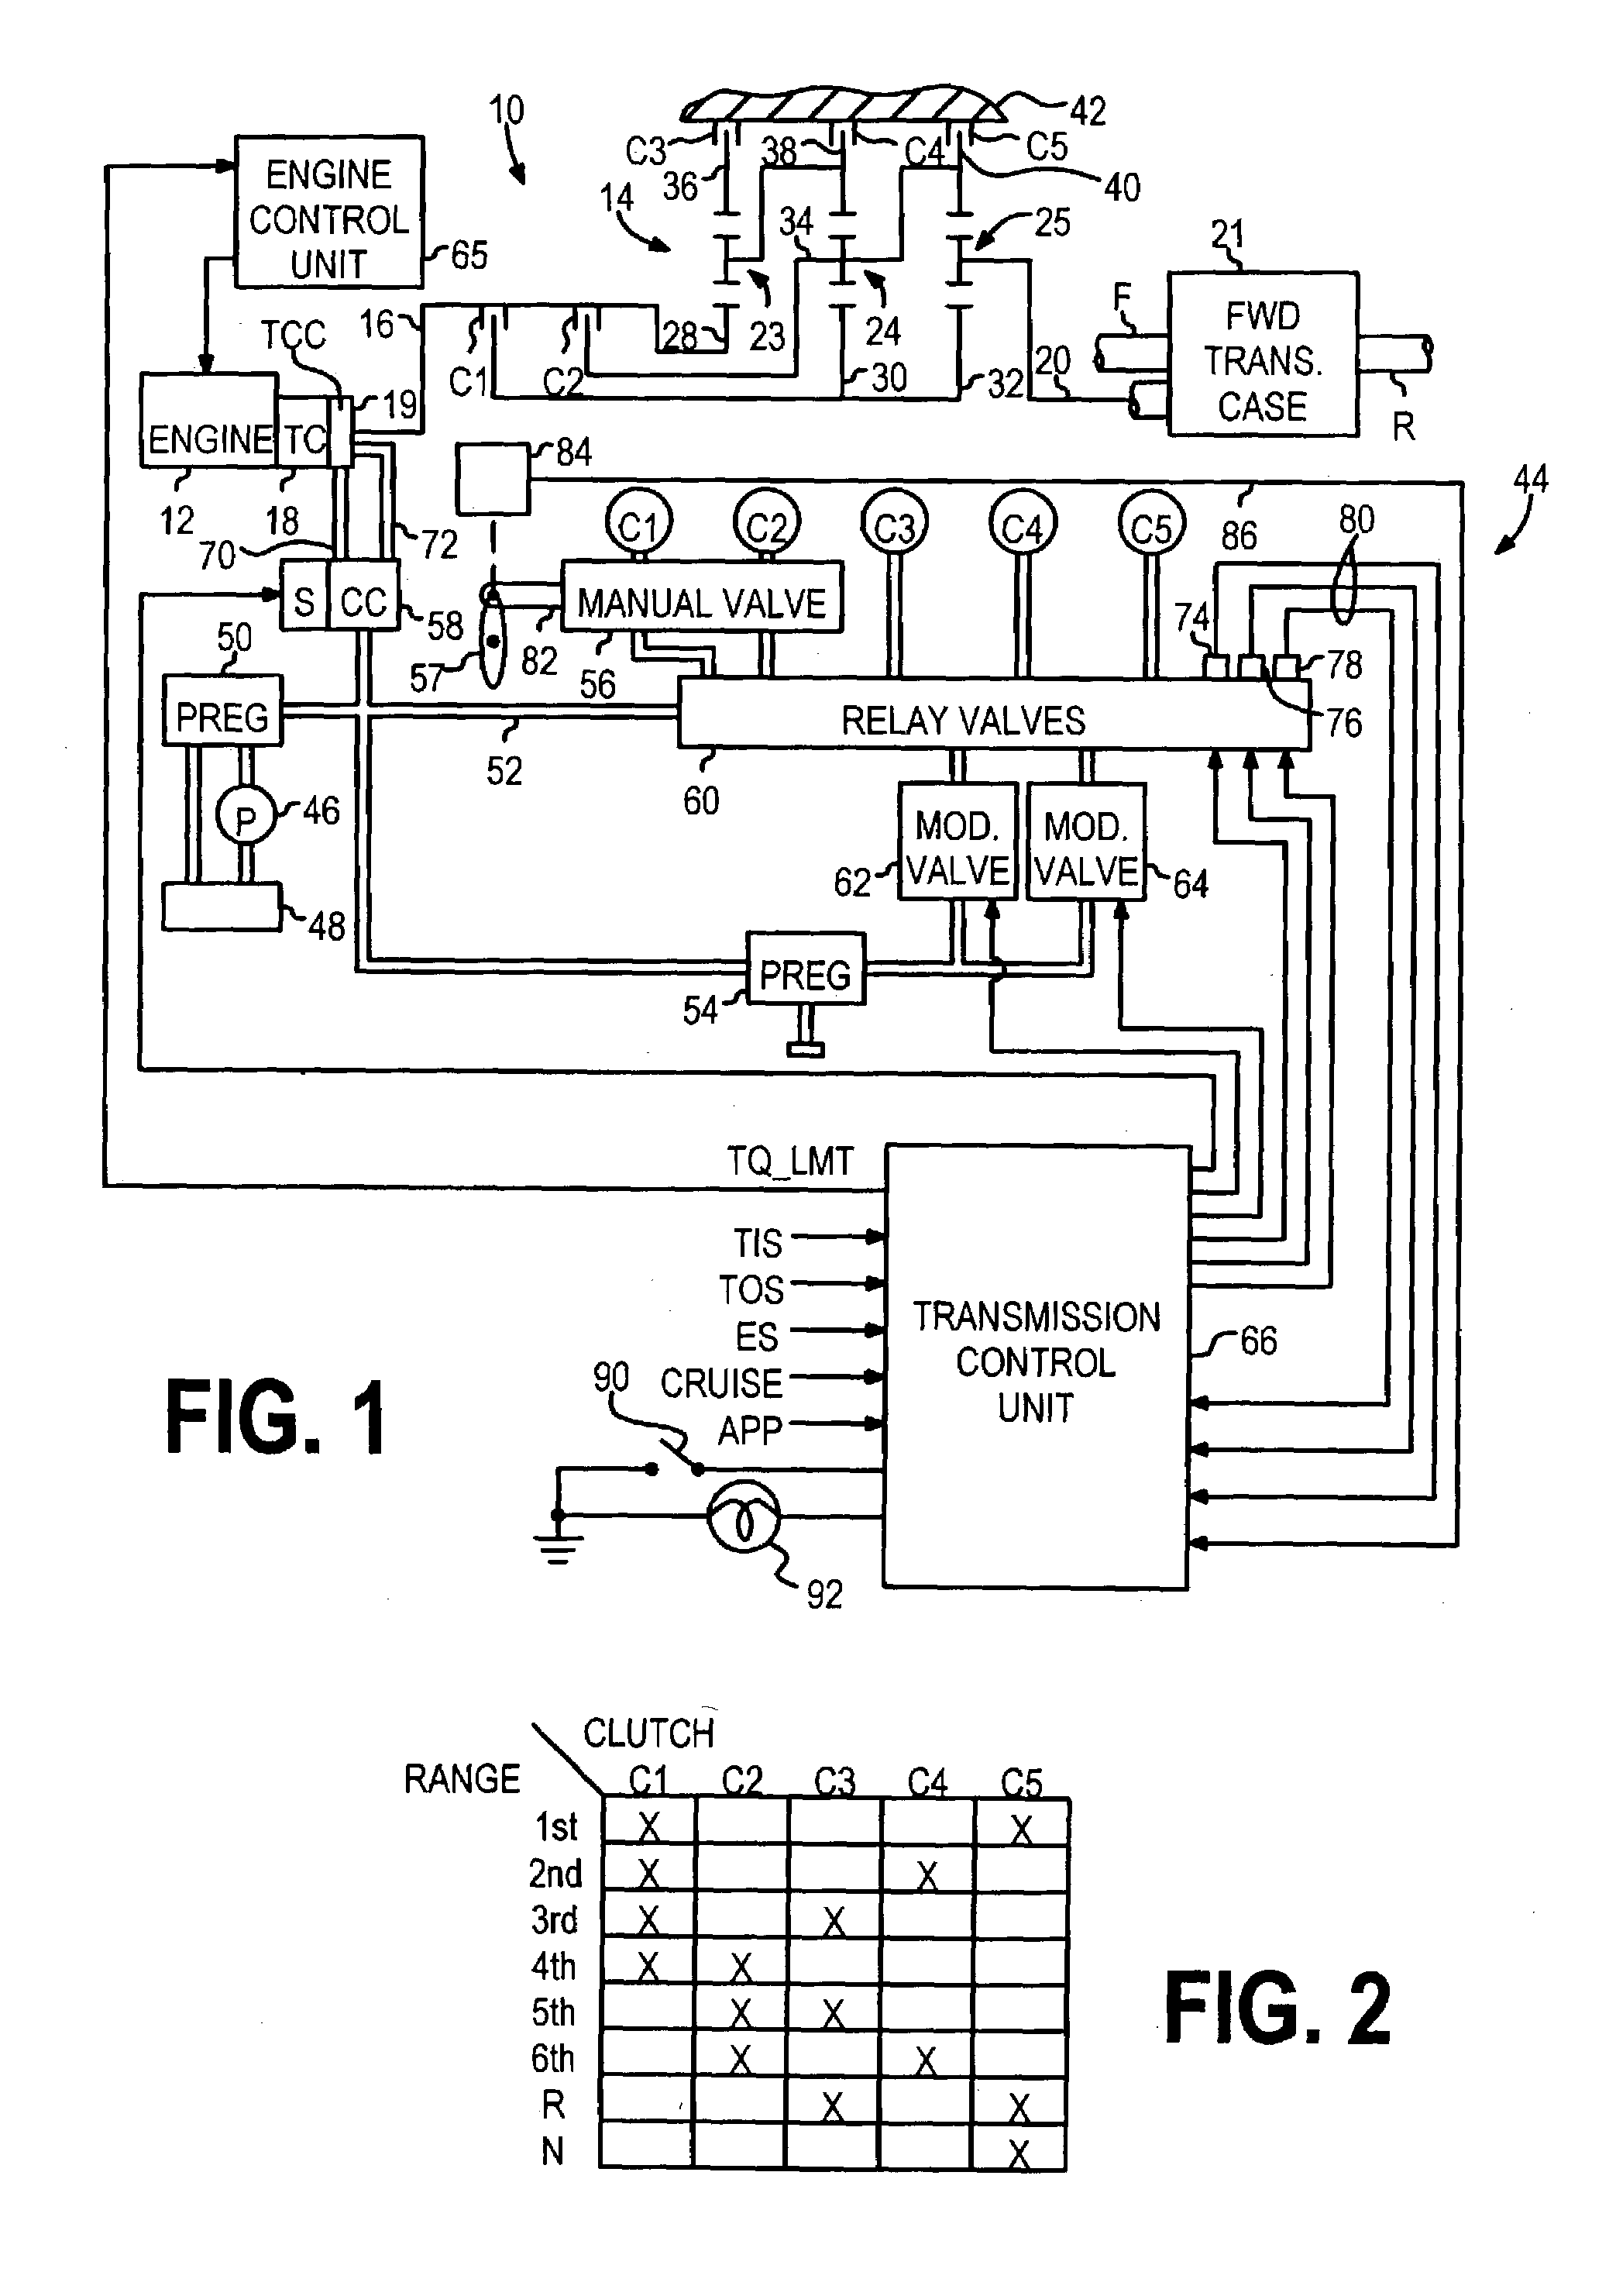 Motor vehicle powertrain control method for low traction conditions